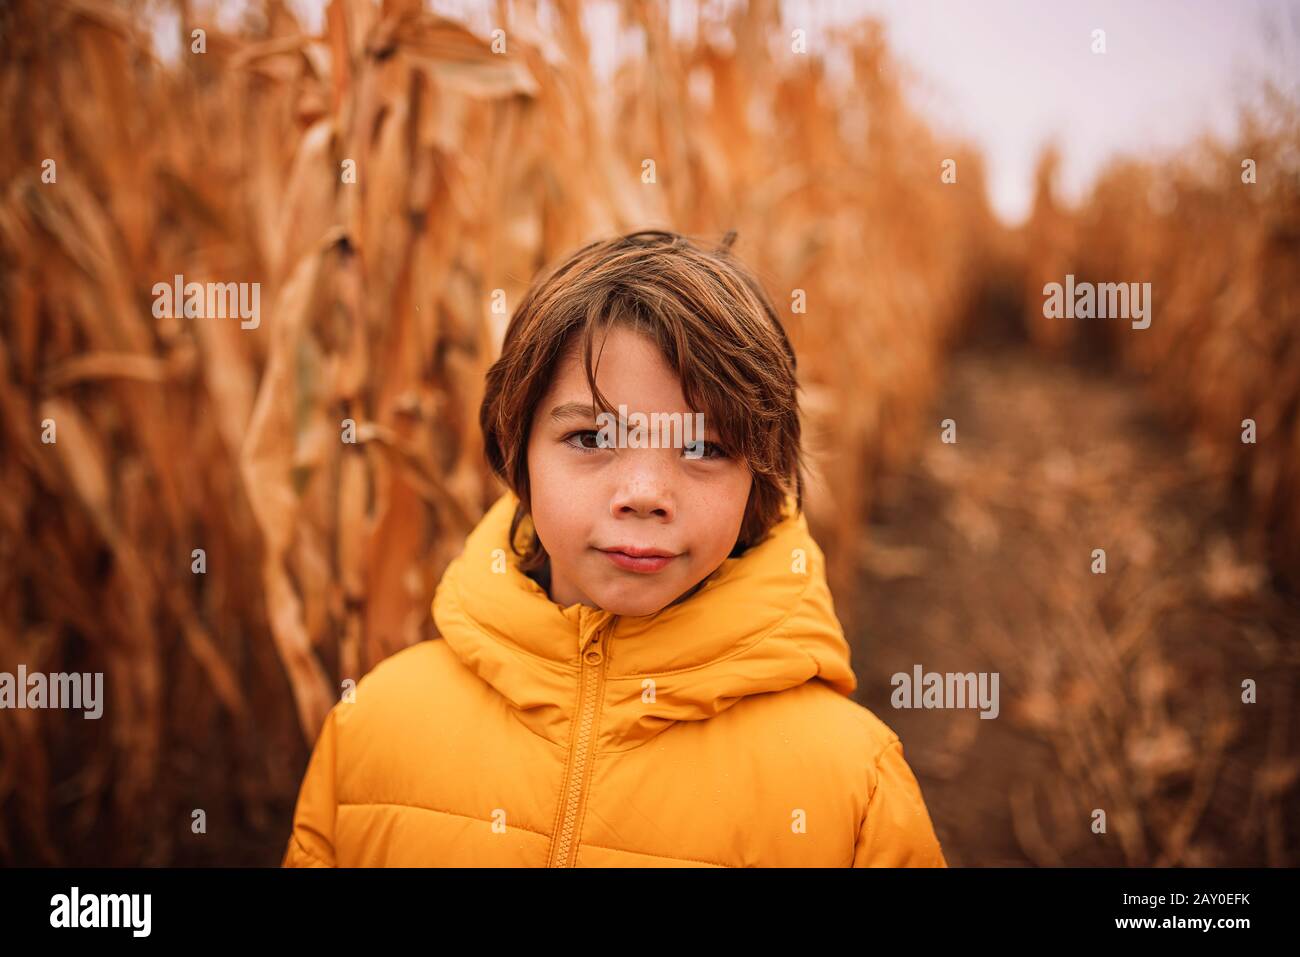 Portrait of a boy standing in a corn field in the fall, USA Stock Photo